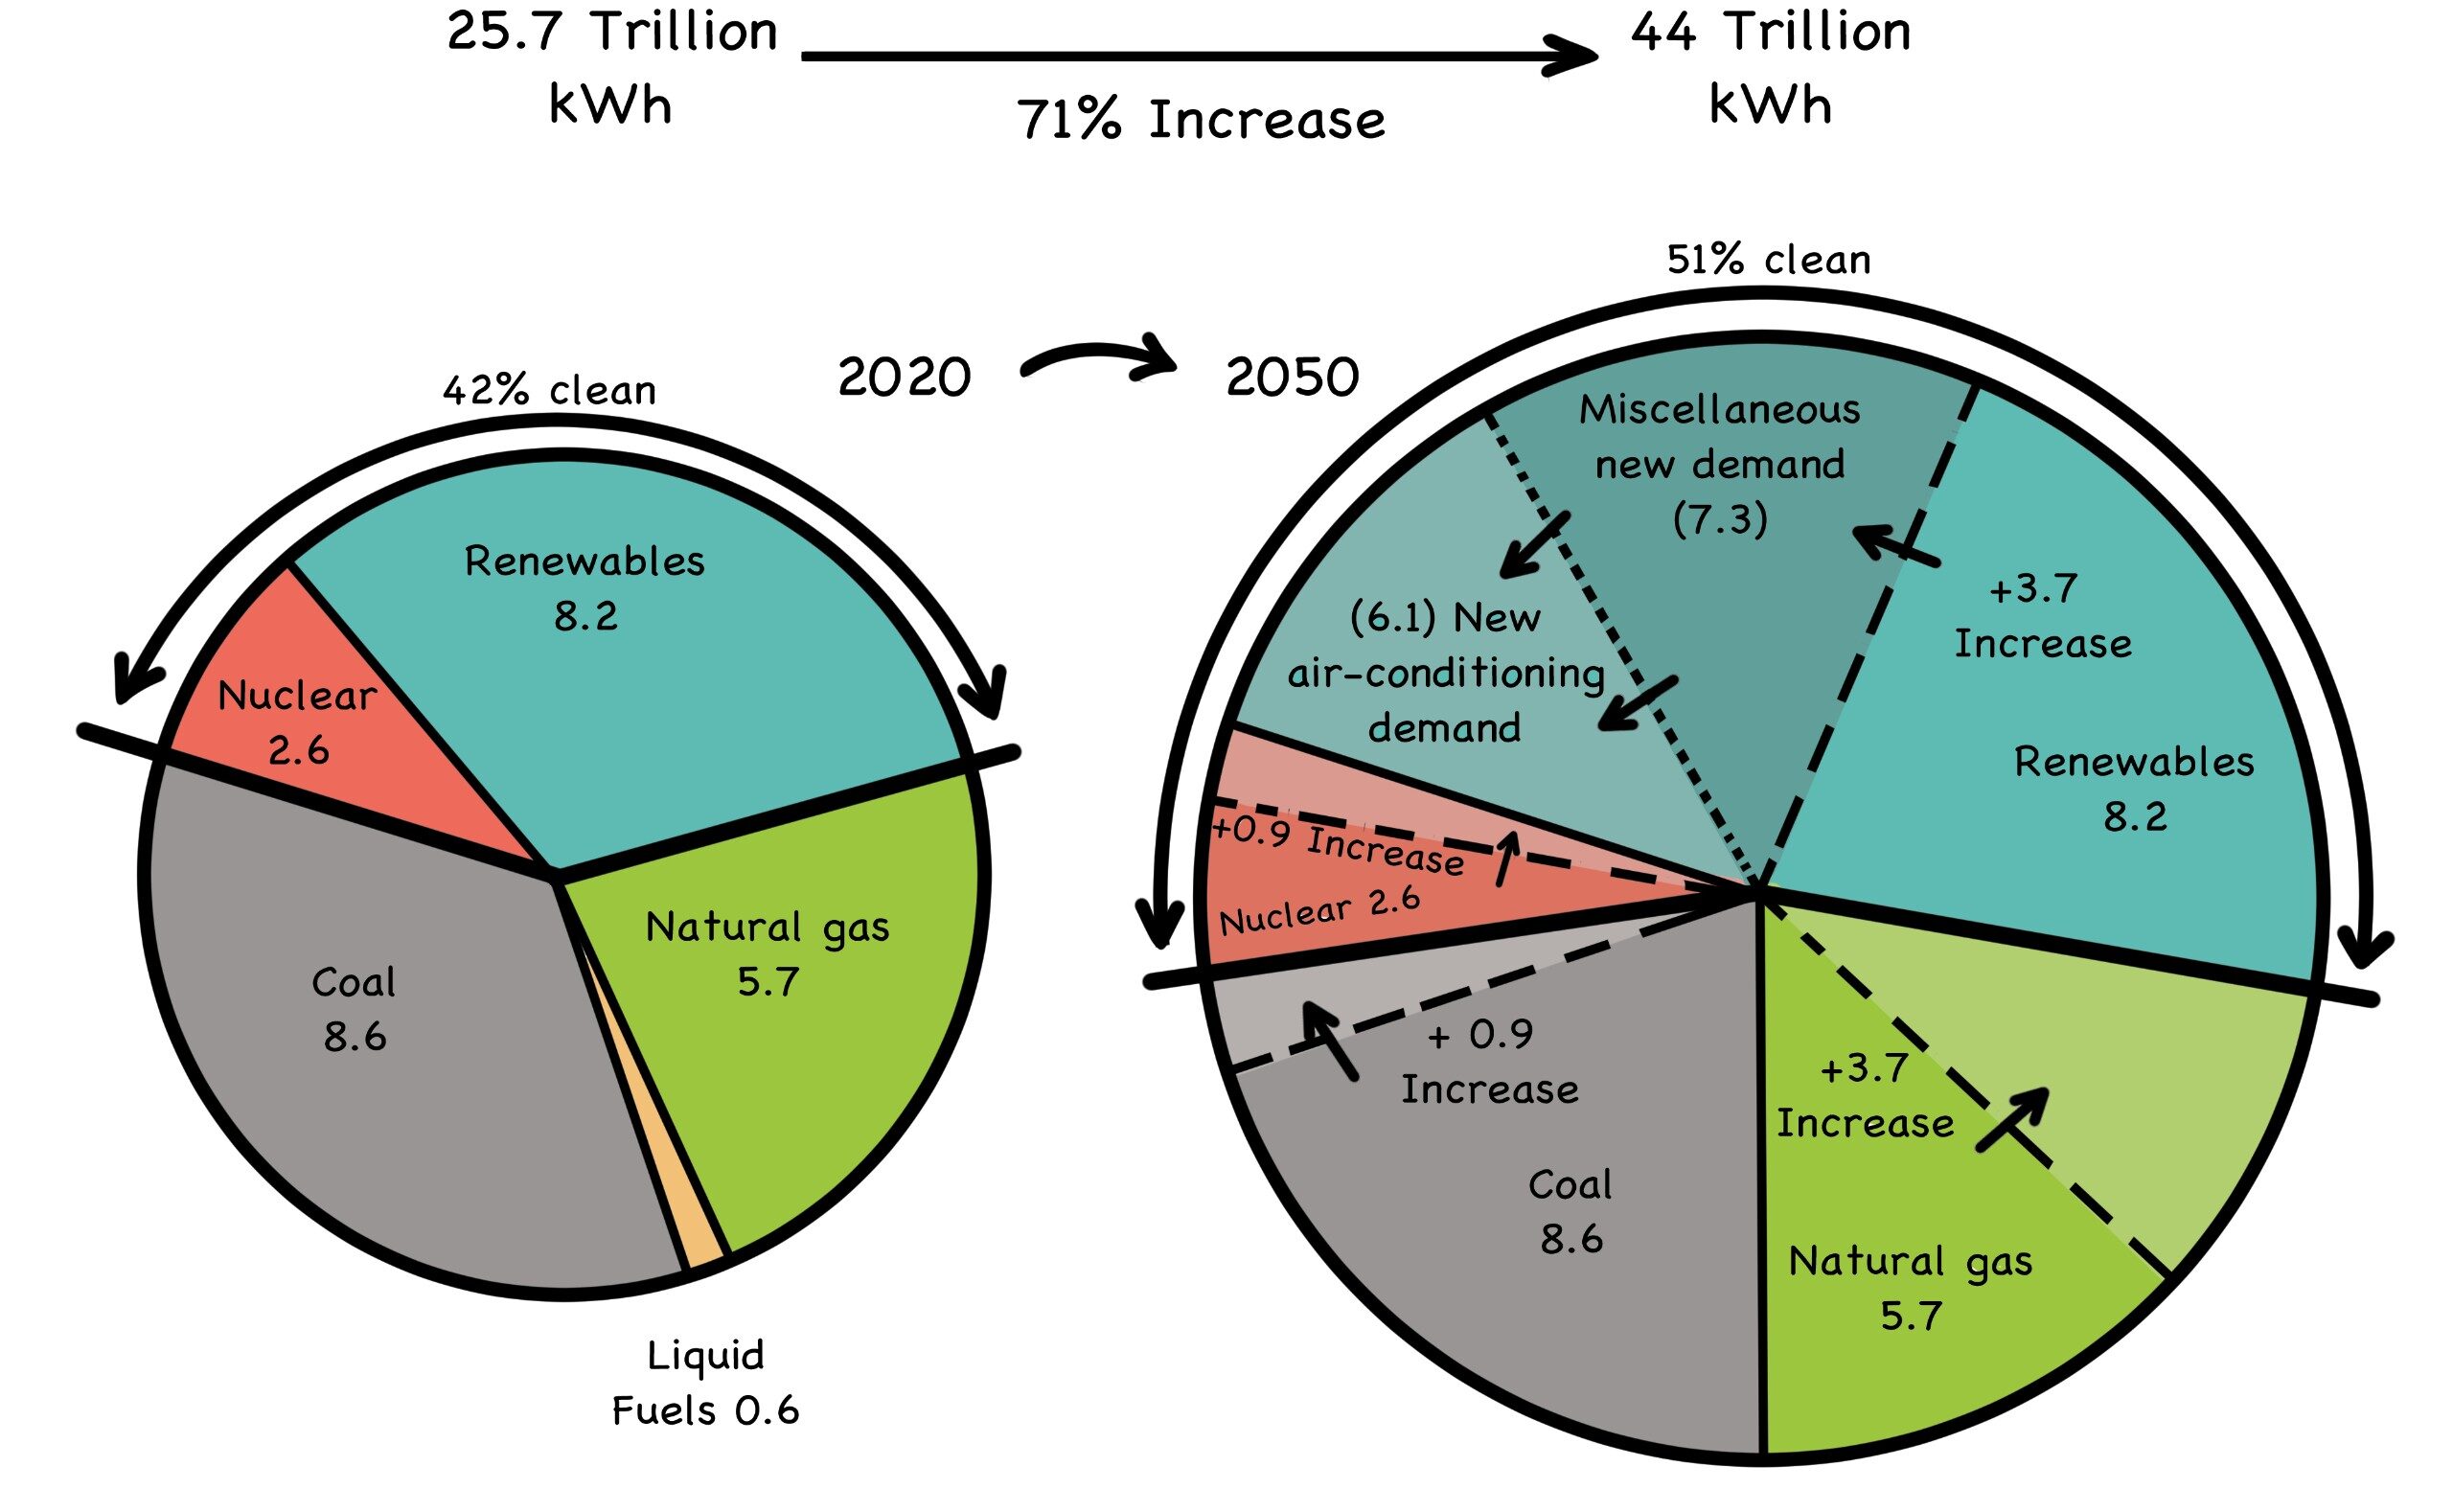 Fig. S-10 Projected Generation to 2050 